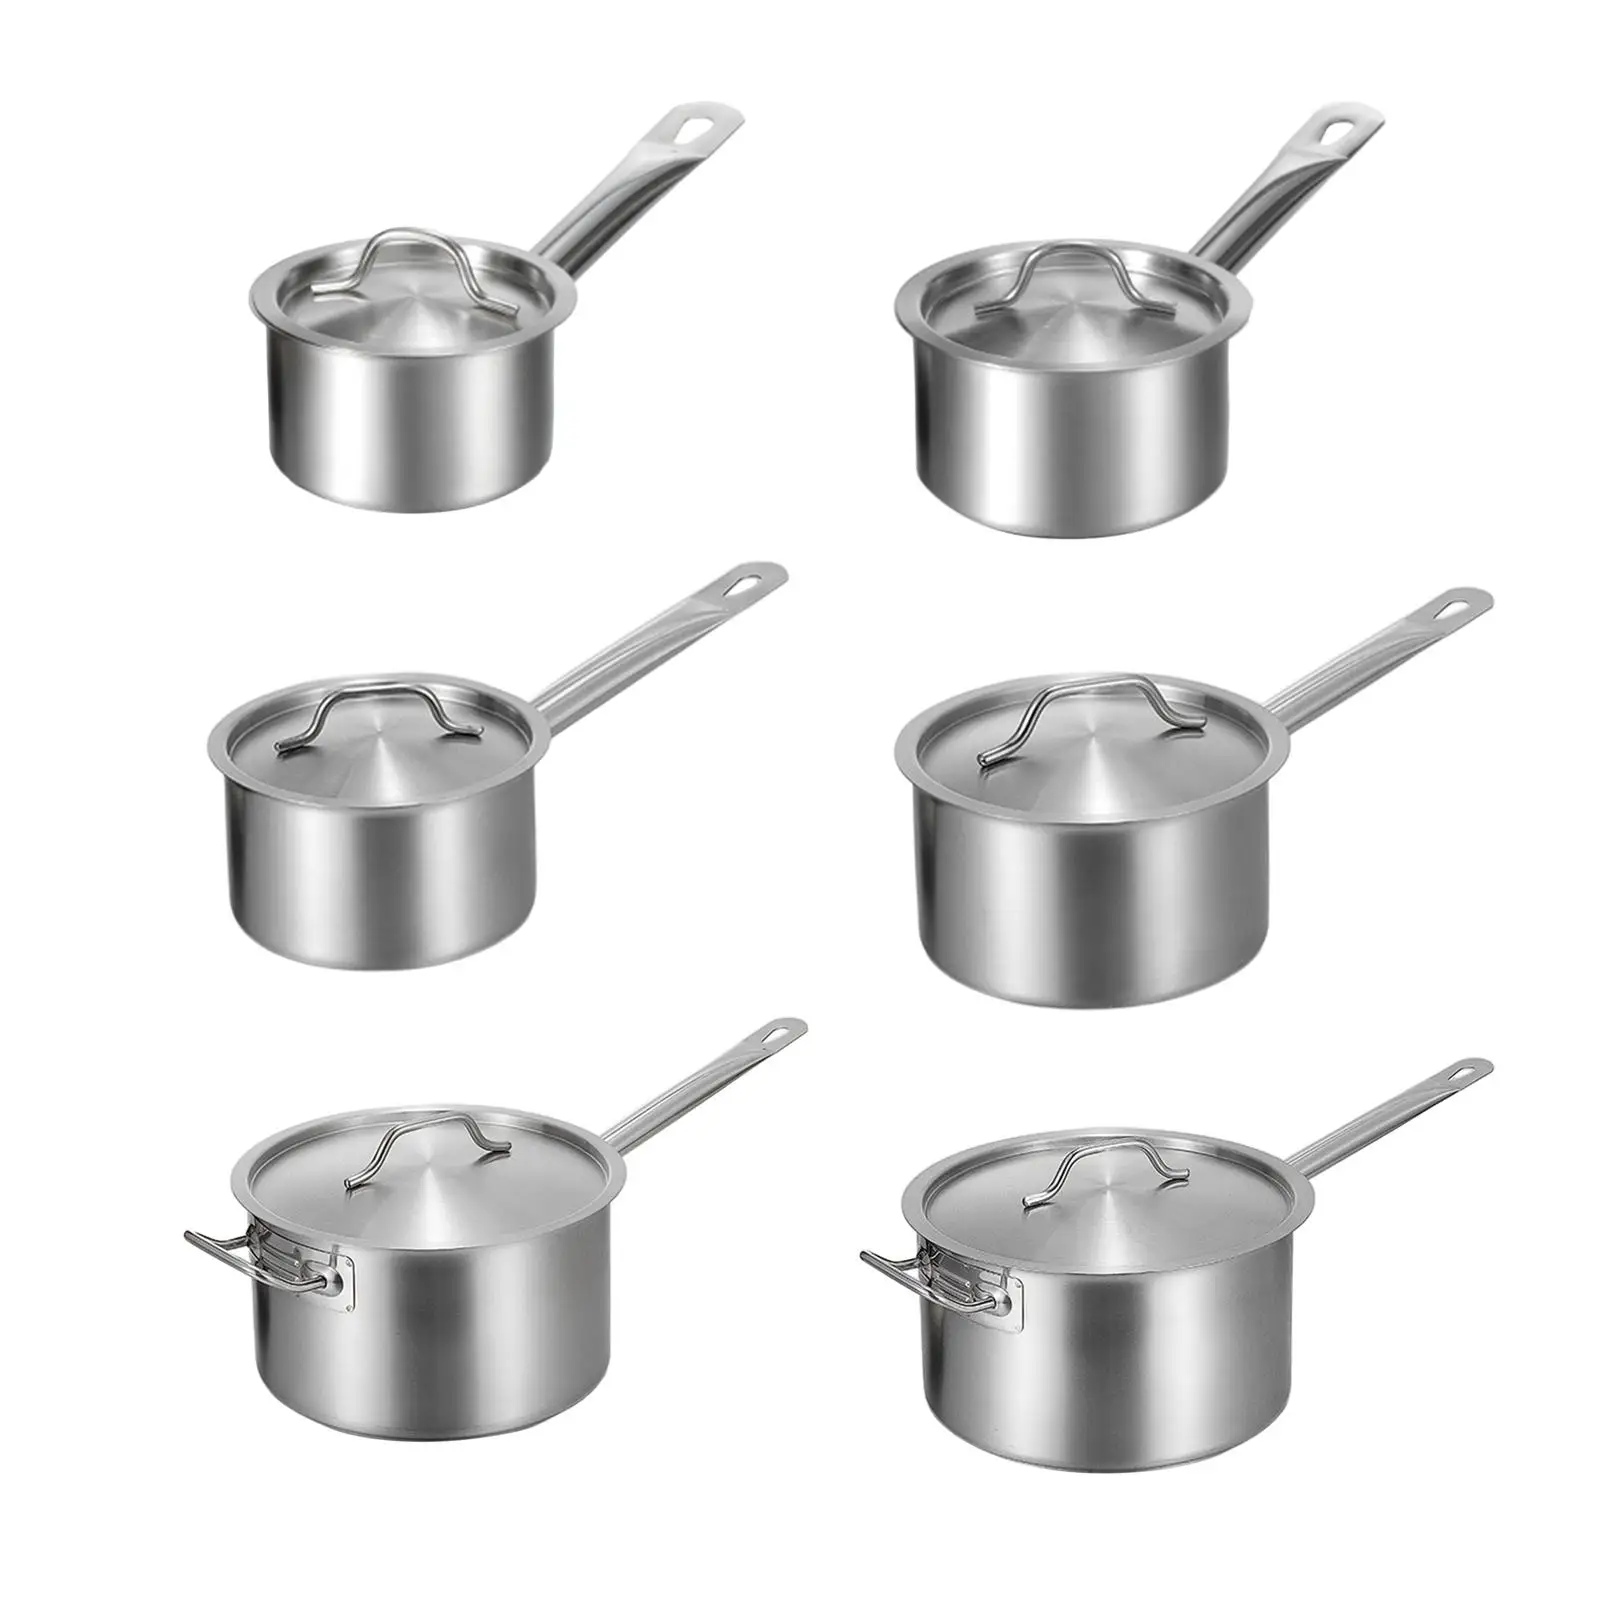 Saucepan with Lid Multipurpose Induction Pot for Restaurant Teahouse Kitchen